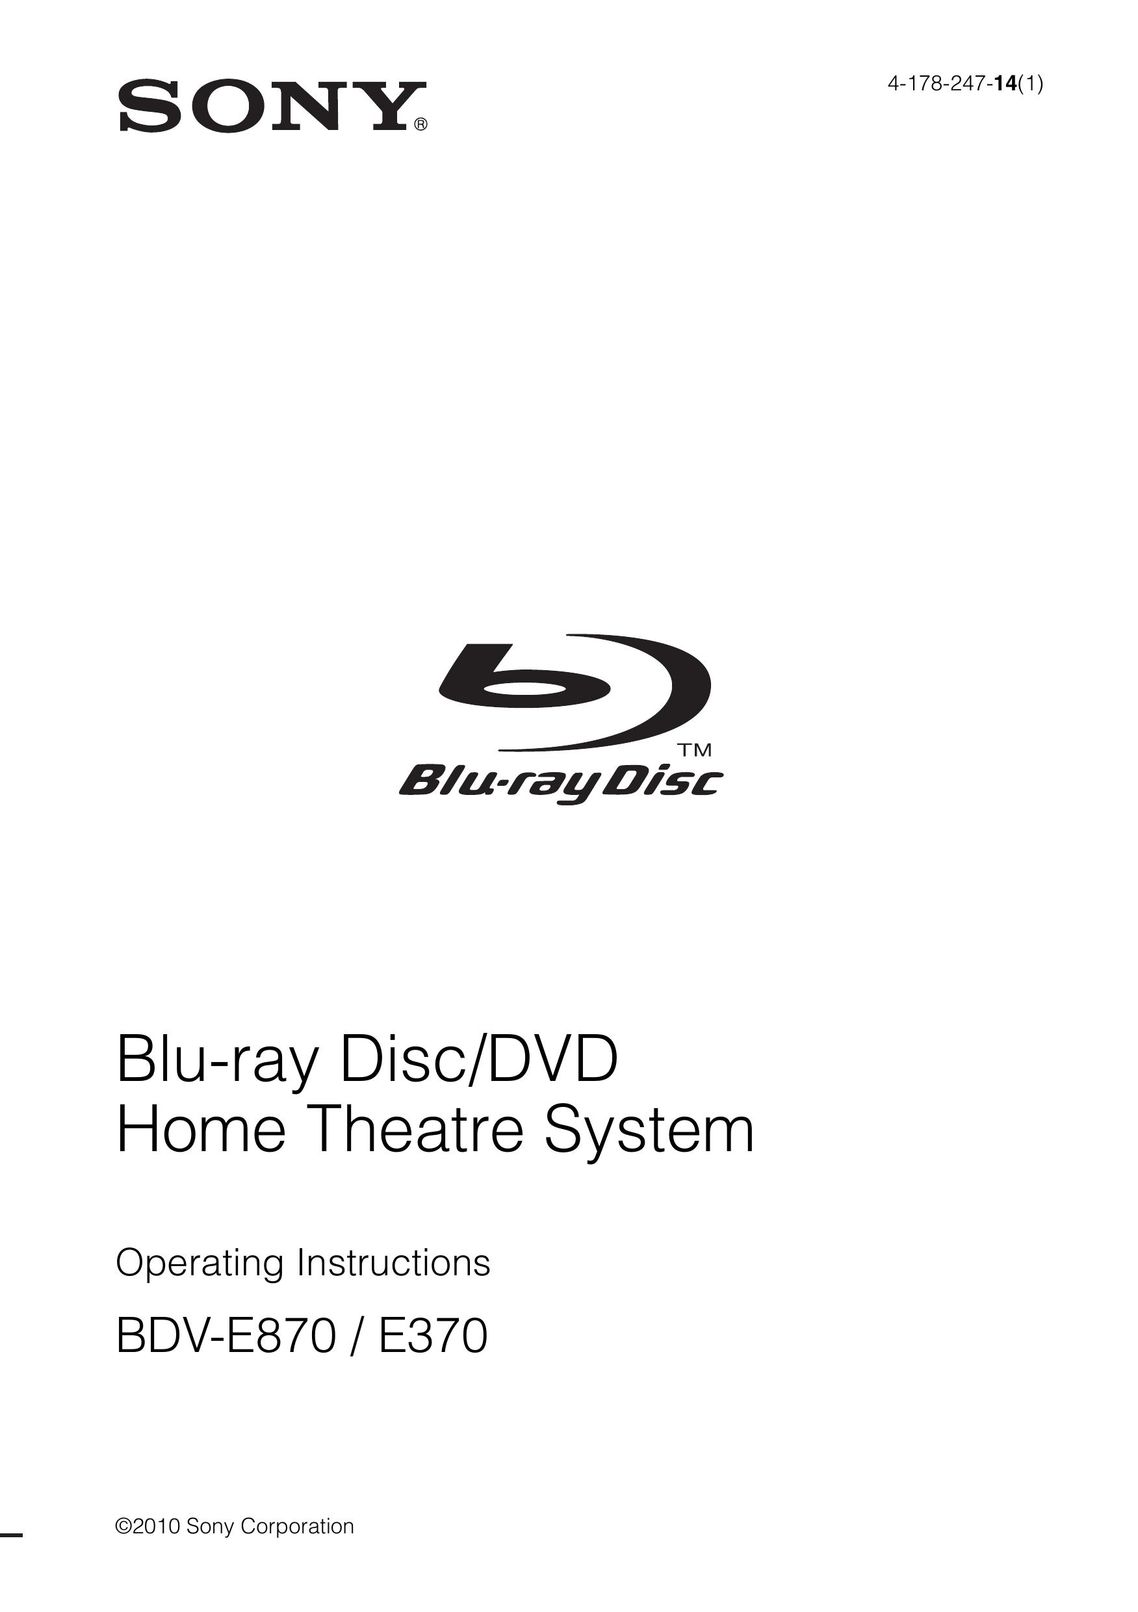 Sony 4-178-247-14(1) Home Theater System User Manual